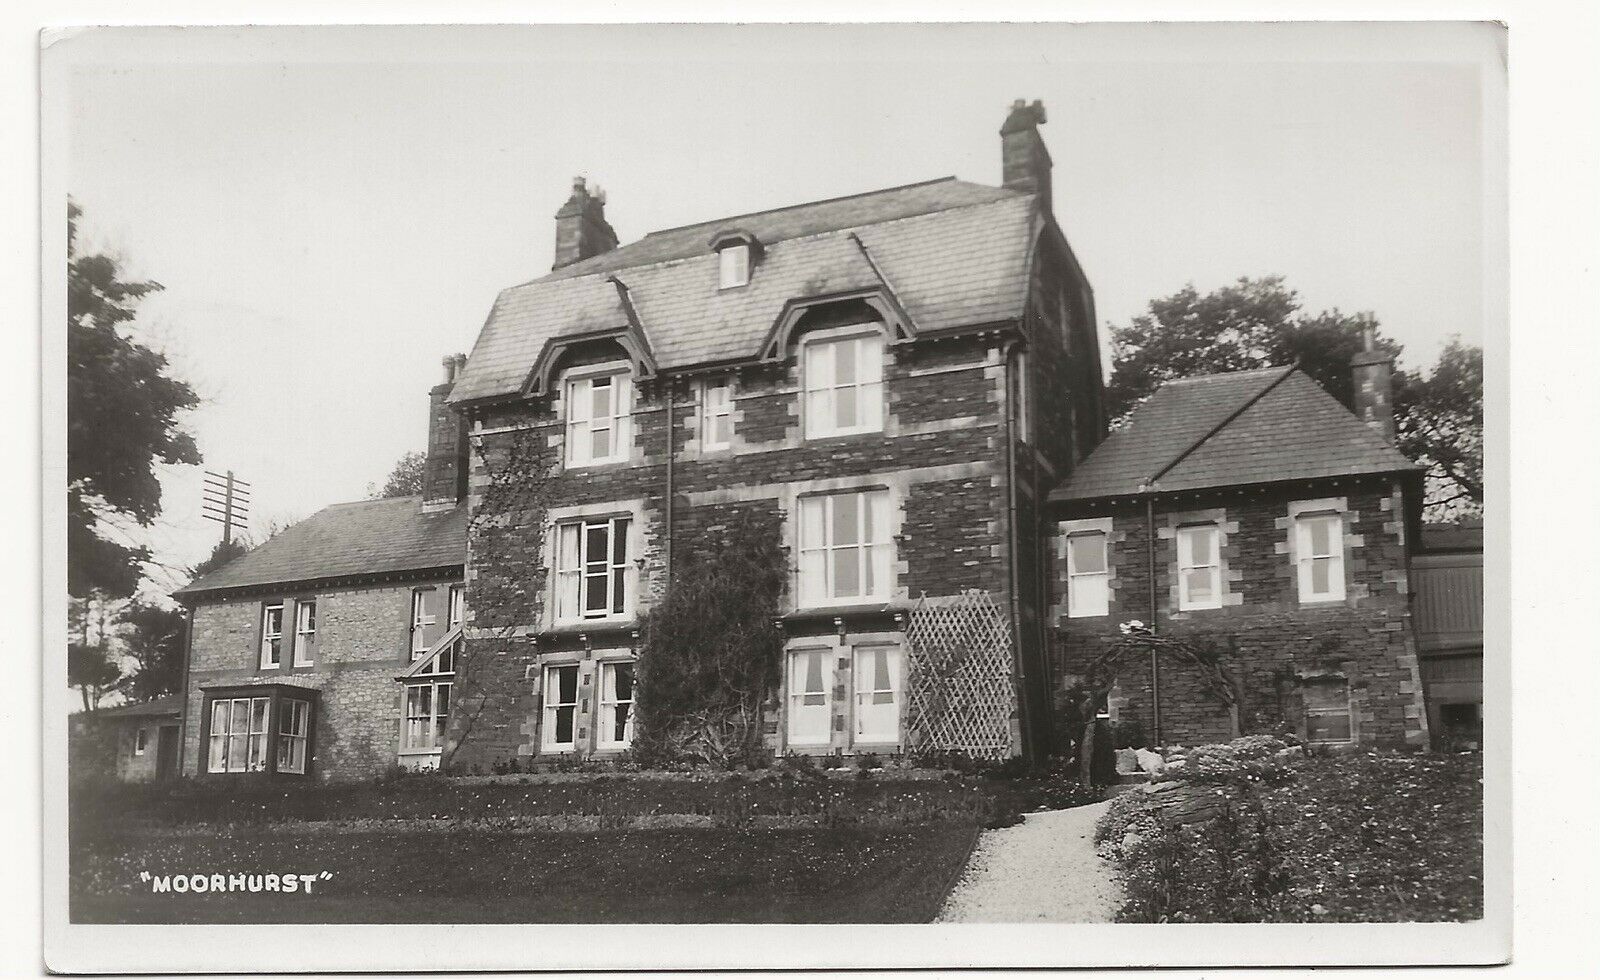 House Clearance - 1939 Real Photo Service Moorhurst House Grange Over Sands Cumbria by Slingsby